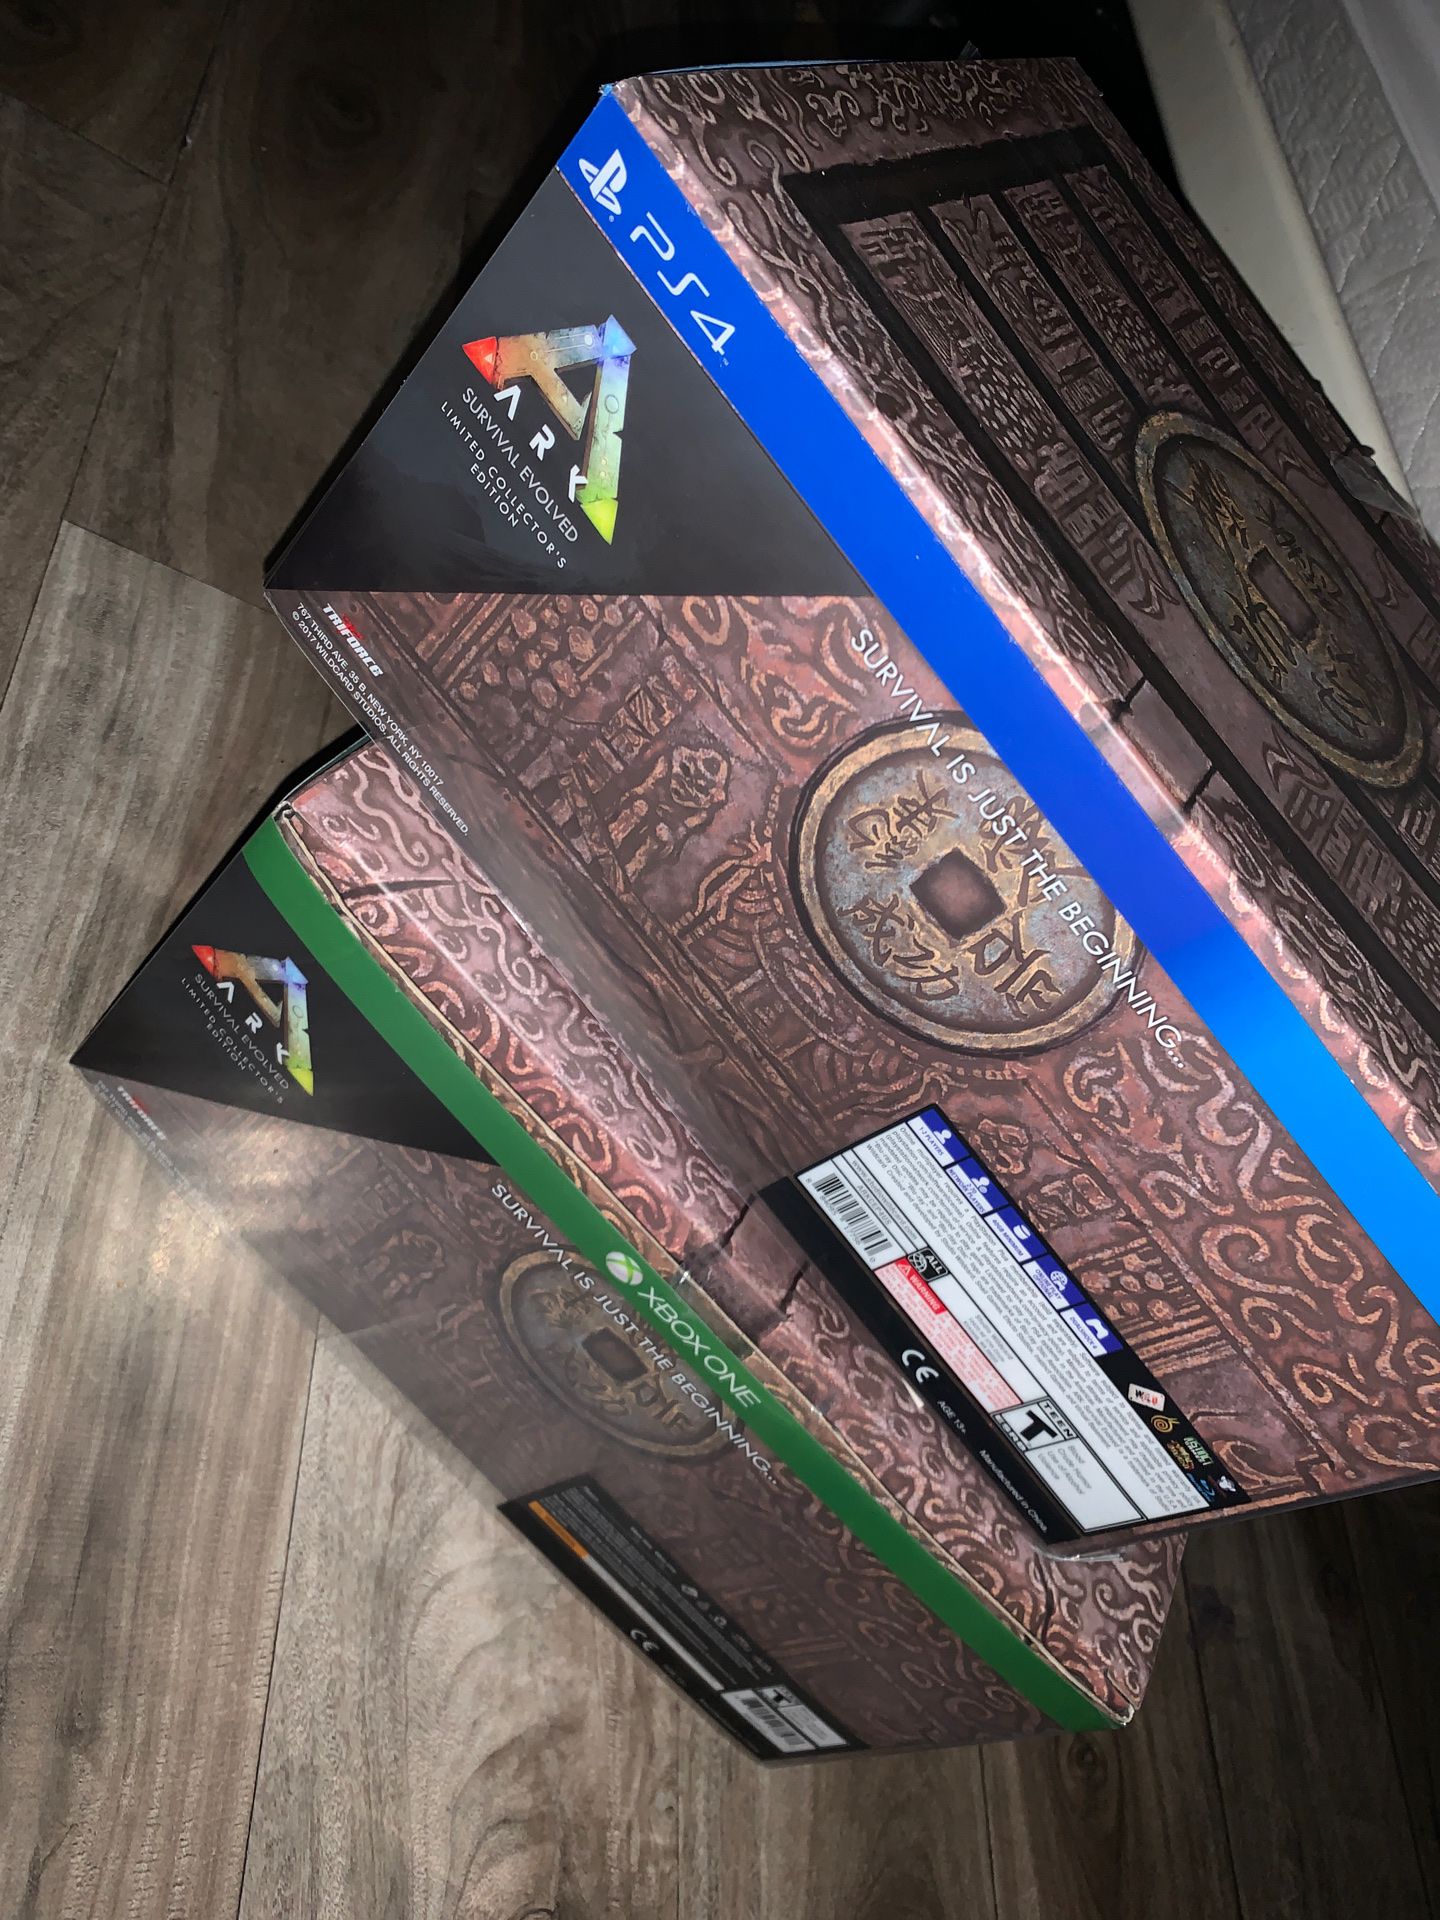 Ark survival evolved limited collectors edition (ps4 version)